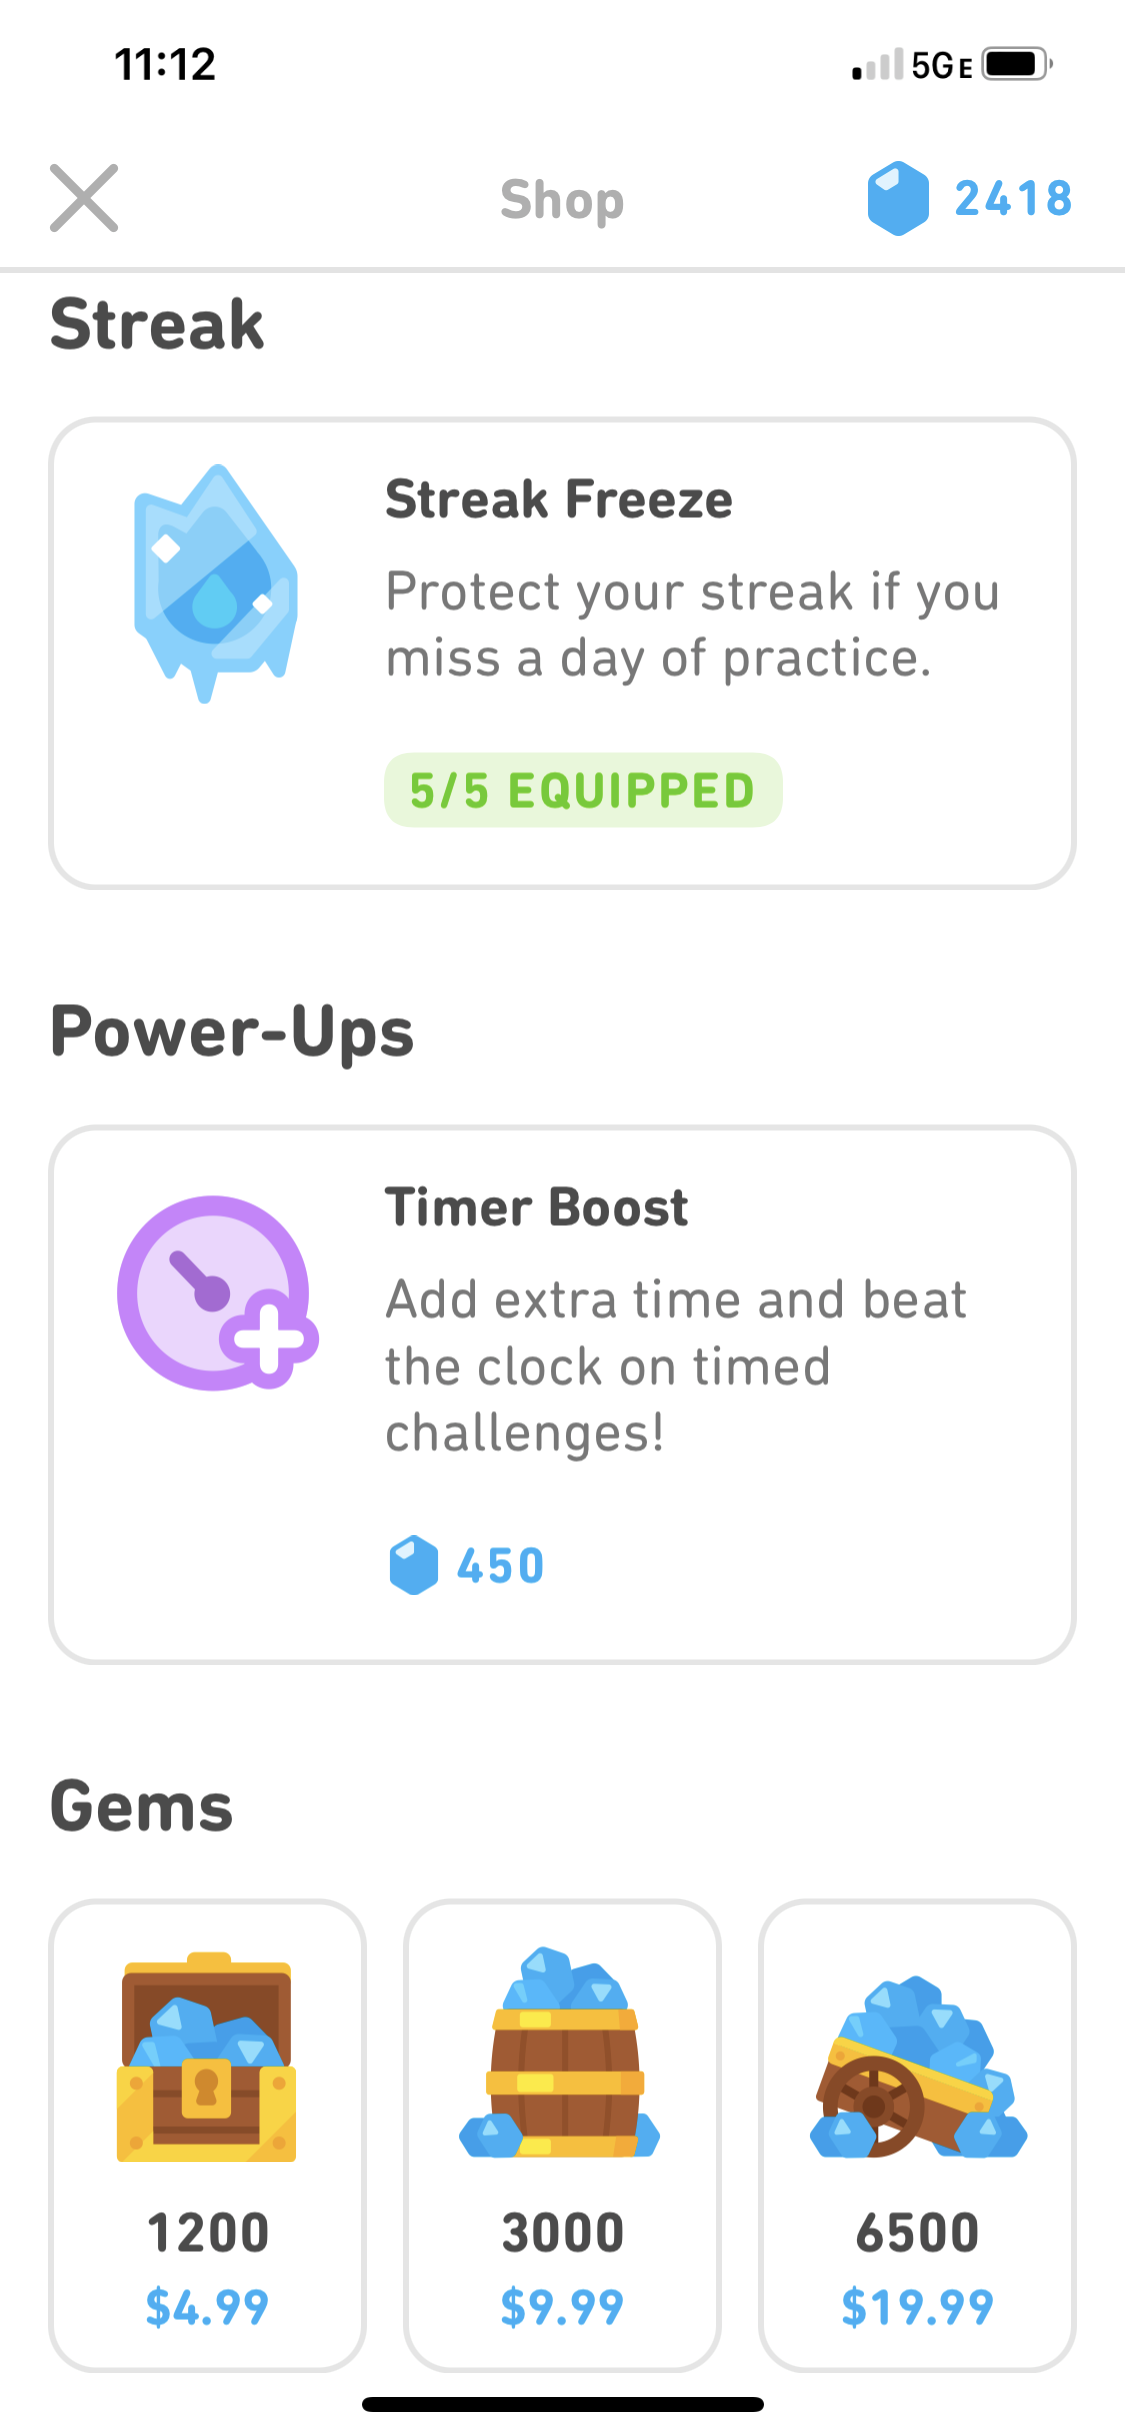 Screenshot of the Shop in the Duolingo app. At the top is the Streak Freeze section, showing that this user has 5 of 5 Streak Freezes equipped. In the middle is the Power-Ups section, where you can buy a Timer Boost for 450 gems. At the bottom is where you can buy 1200, 3000, or 6500 gems.